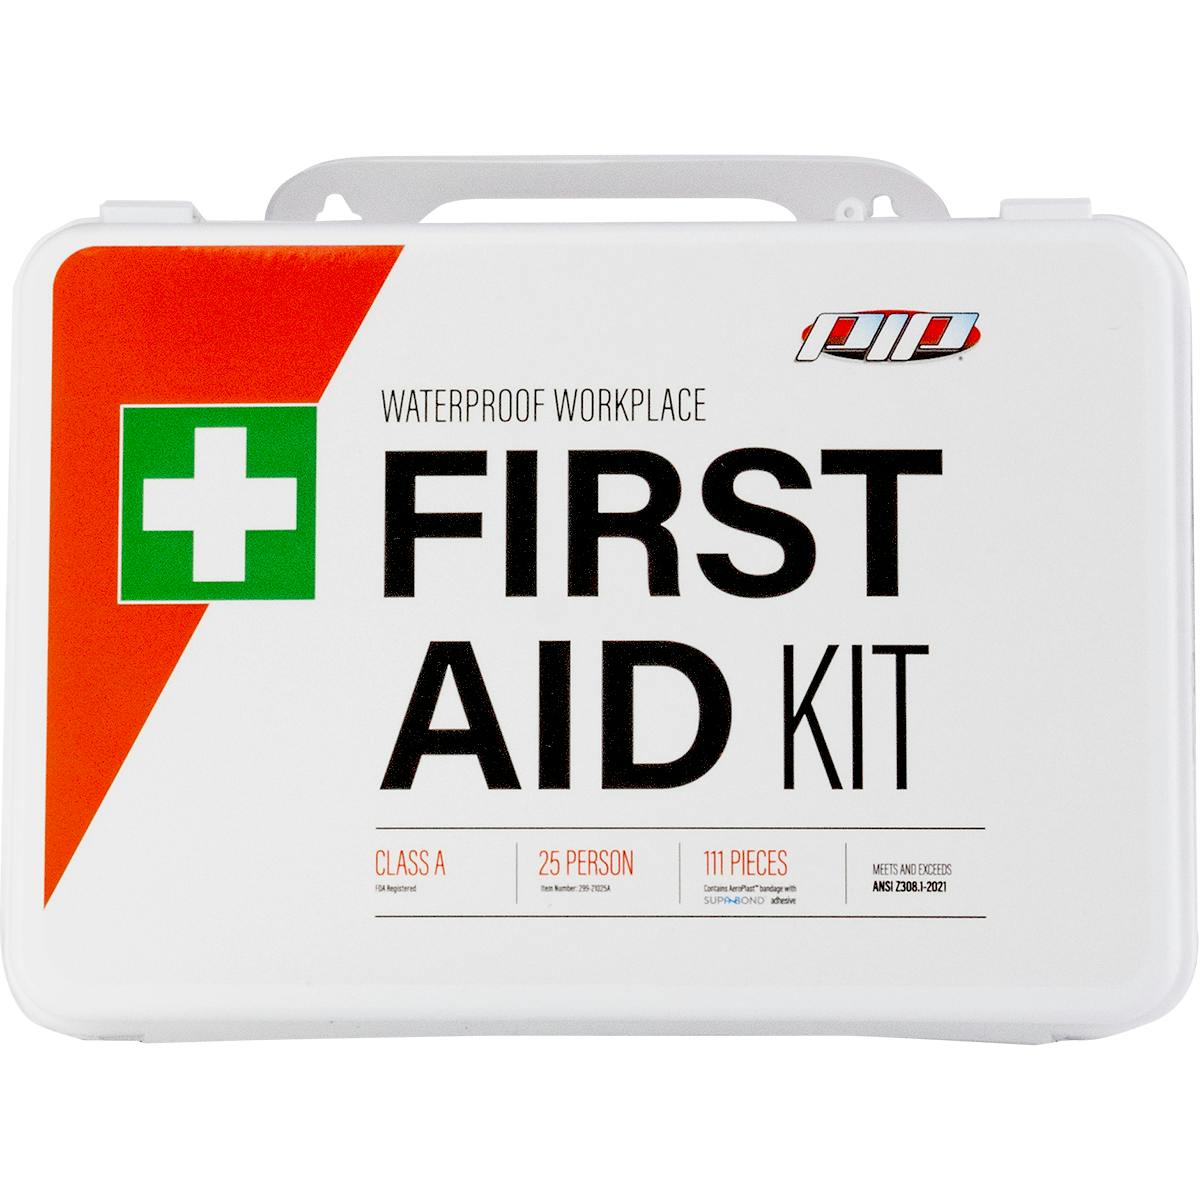 ANSI Class A Waterproof First Aid Kit - 25 Person, White (299-21025A) - KIT_1